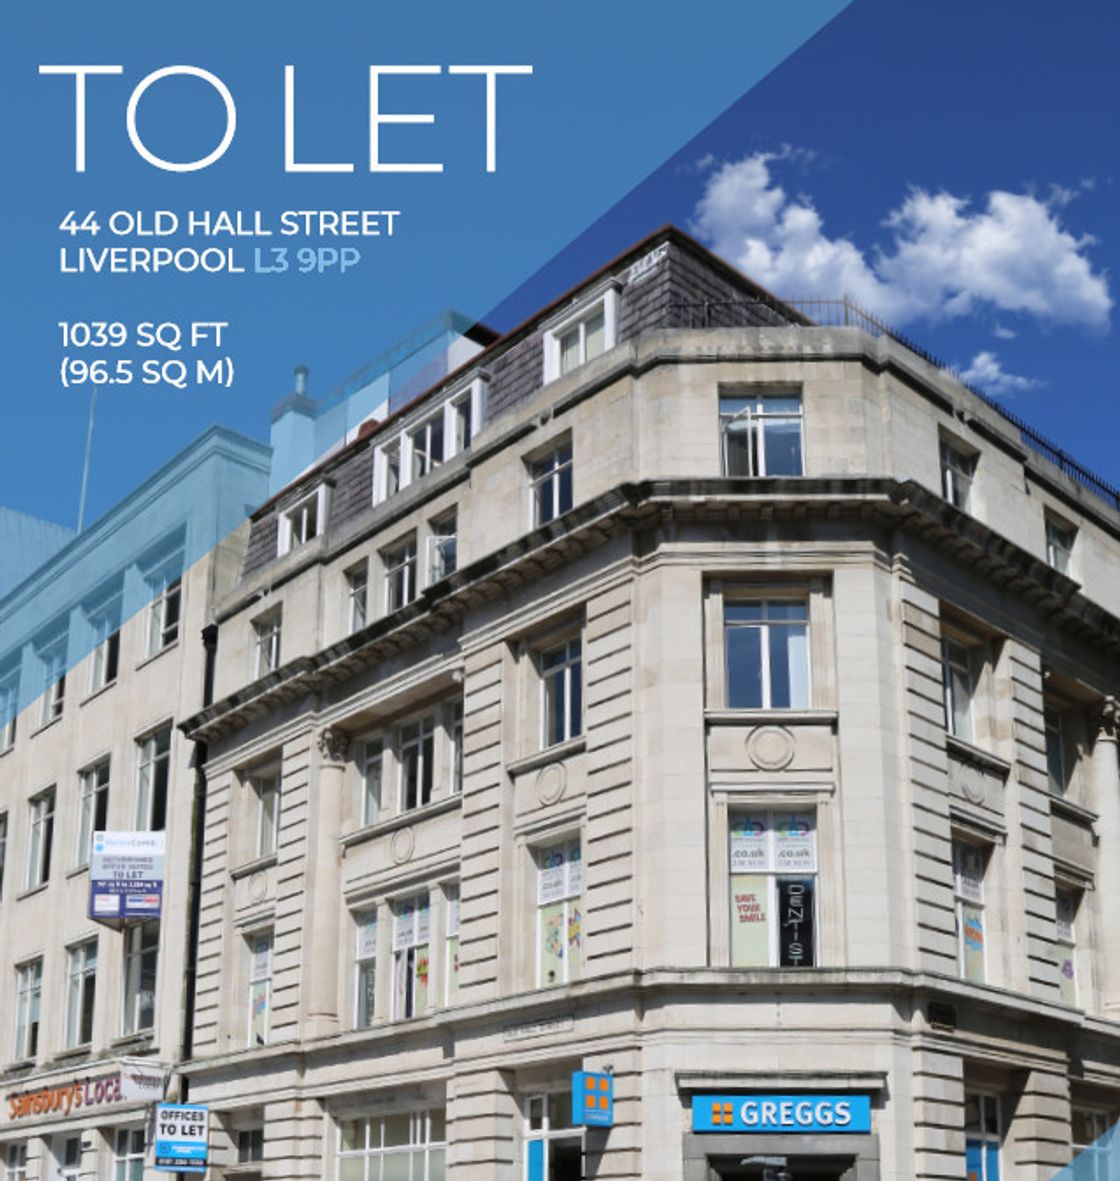 39 Old Hall St, Liverpool L3 9PP, UK